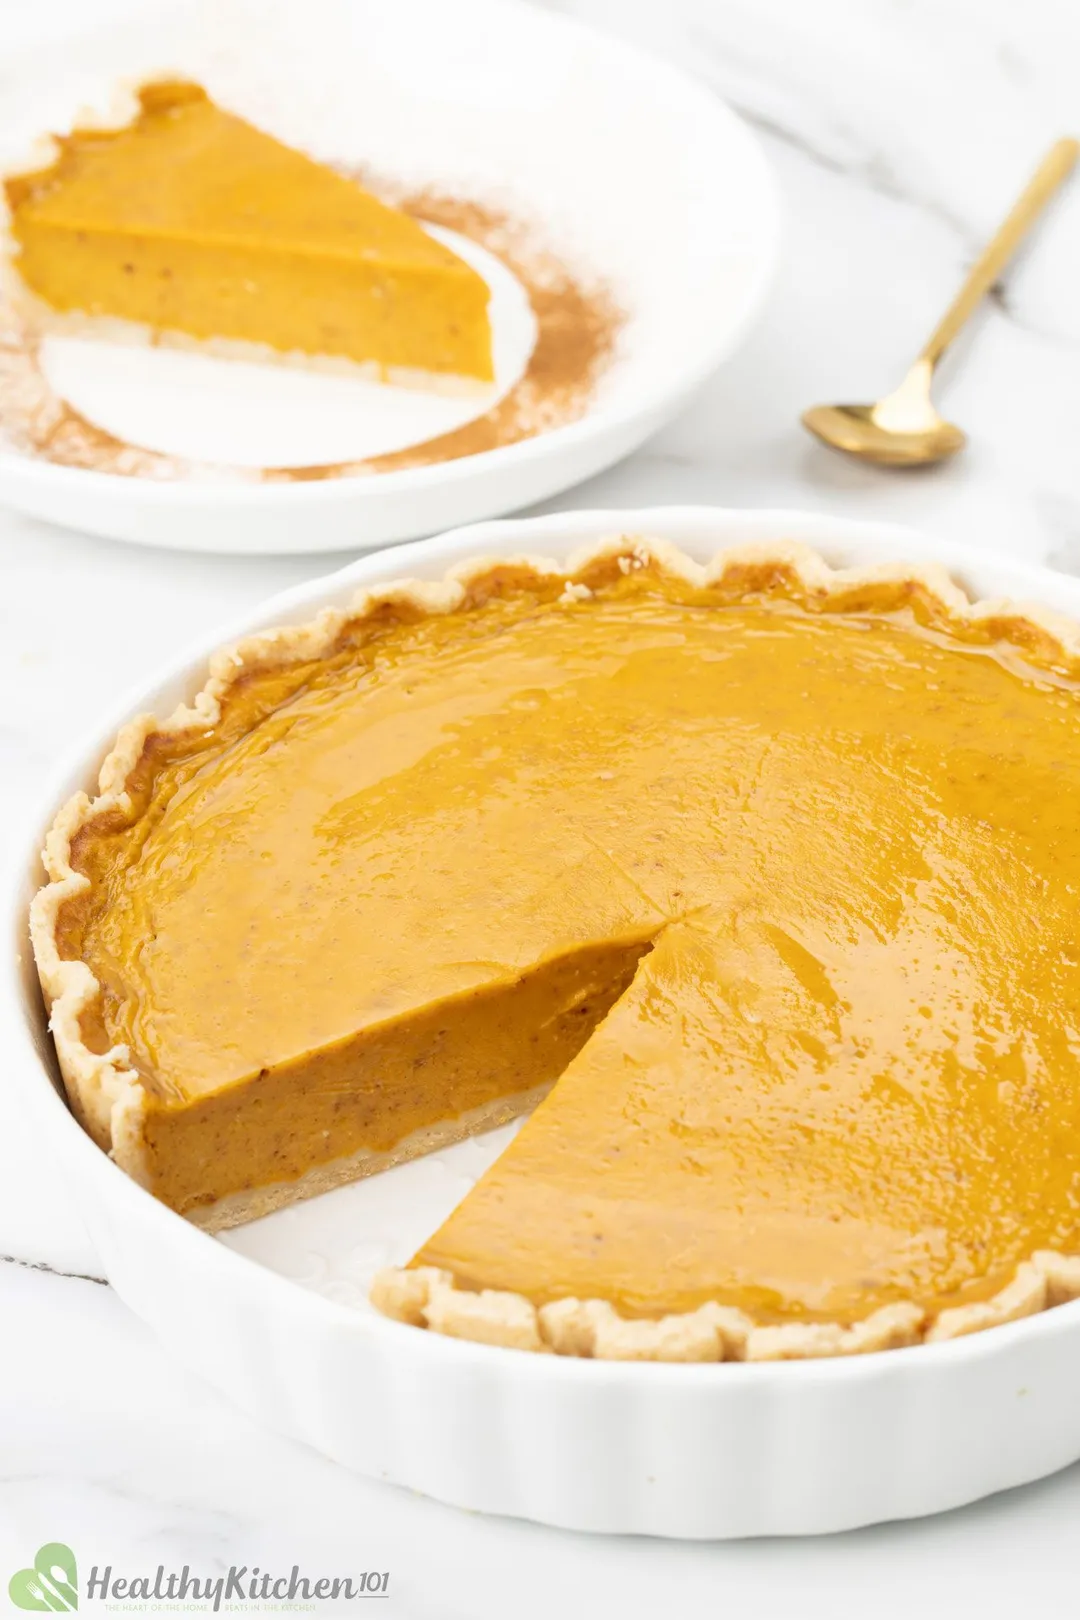 A pumpkin pie with a slice cut out